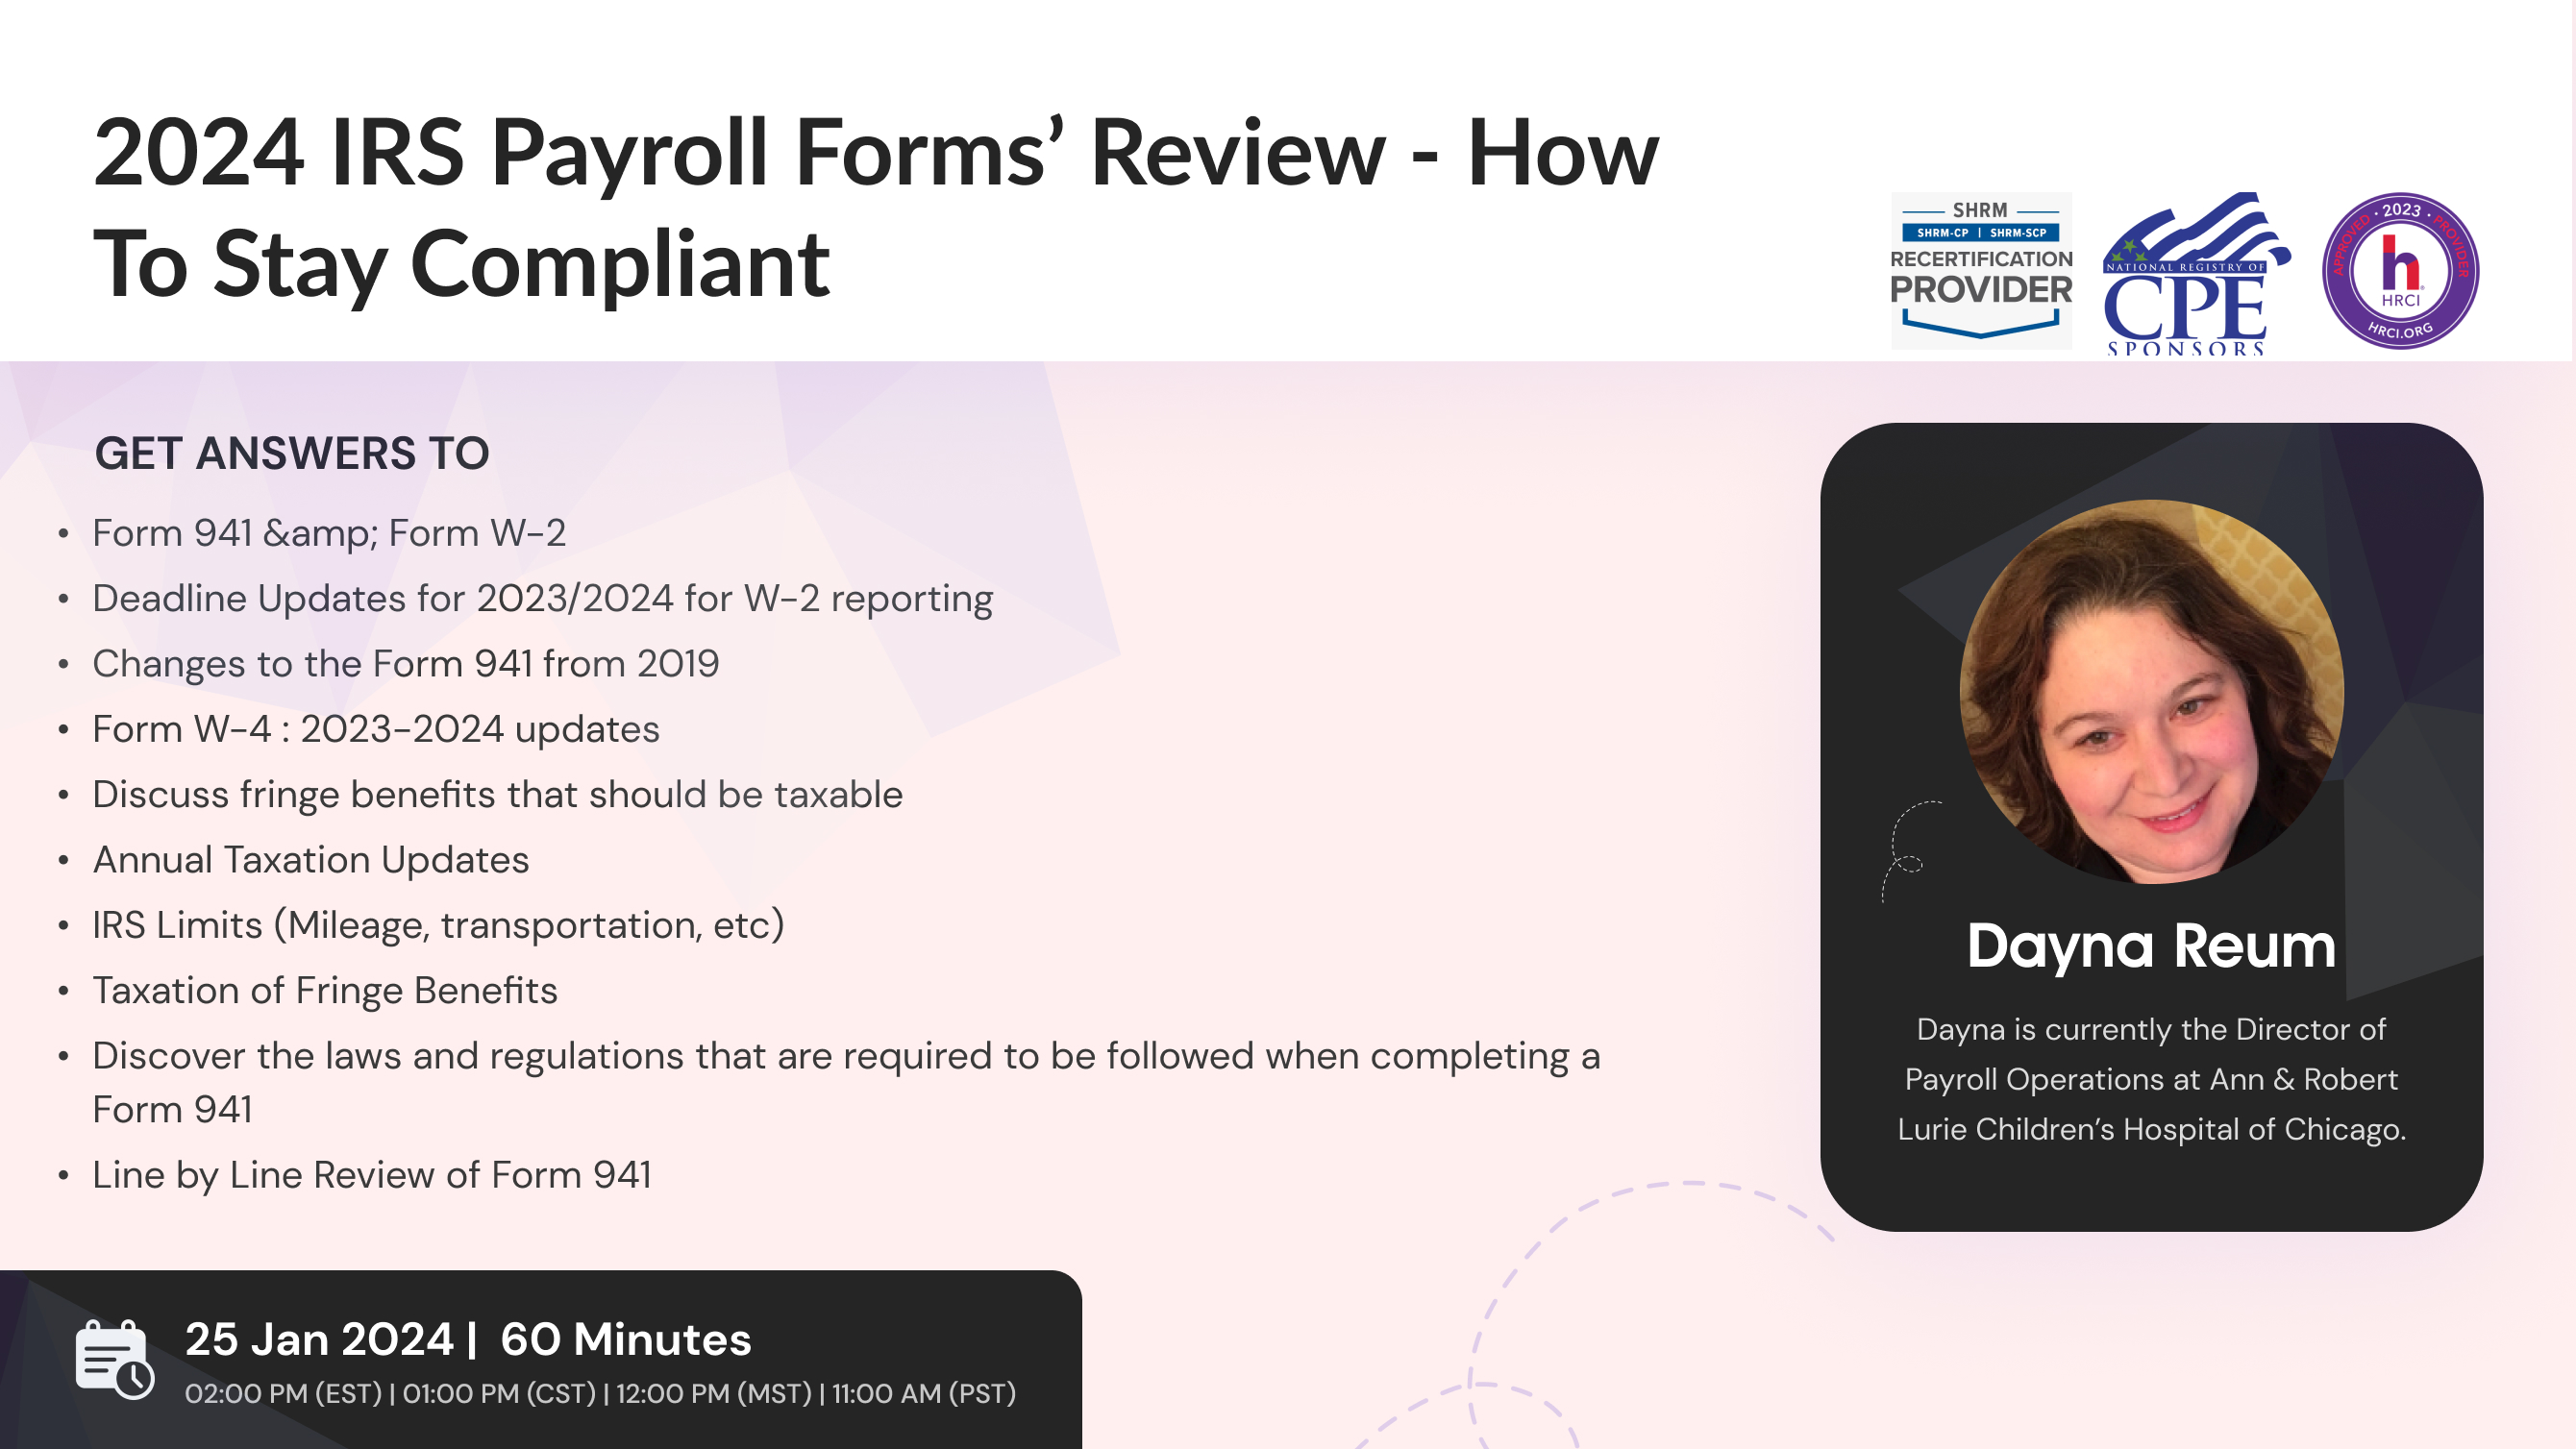 2024 IRS Payroll Forms’ Review - How to Stay Compliant